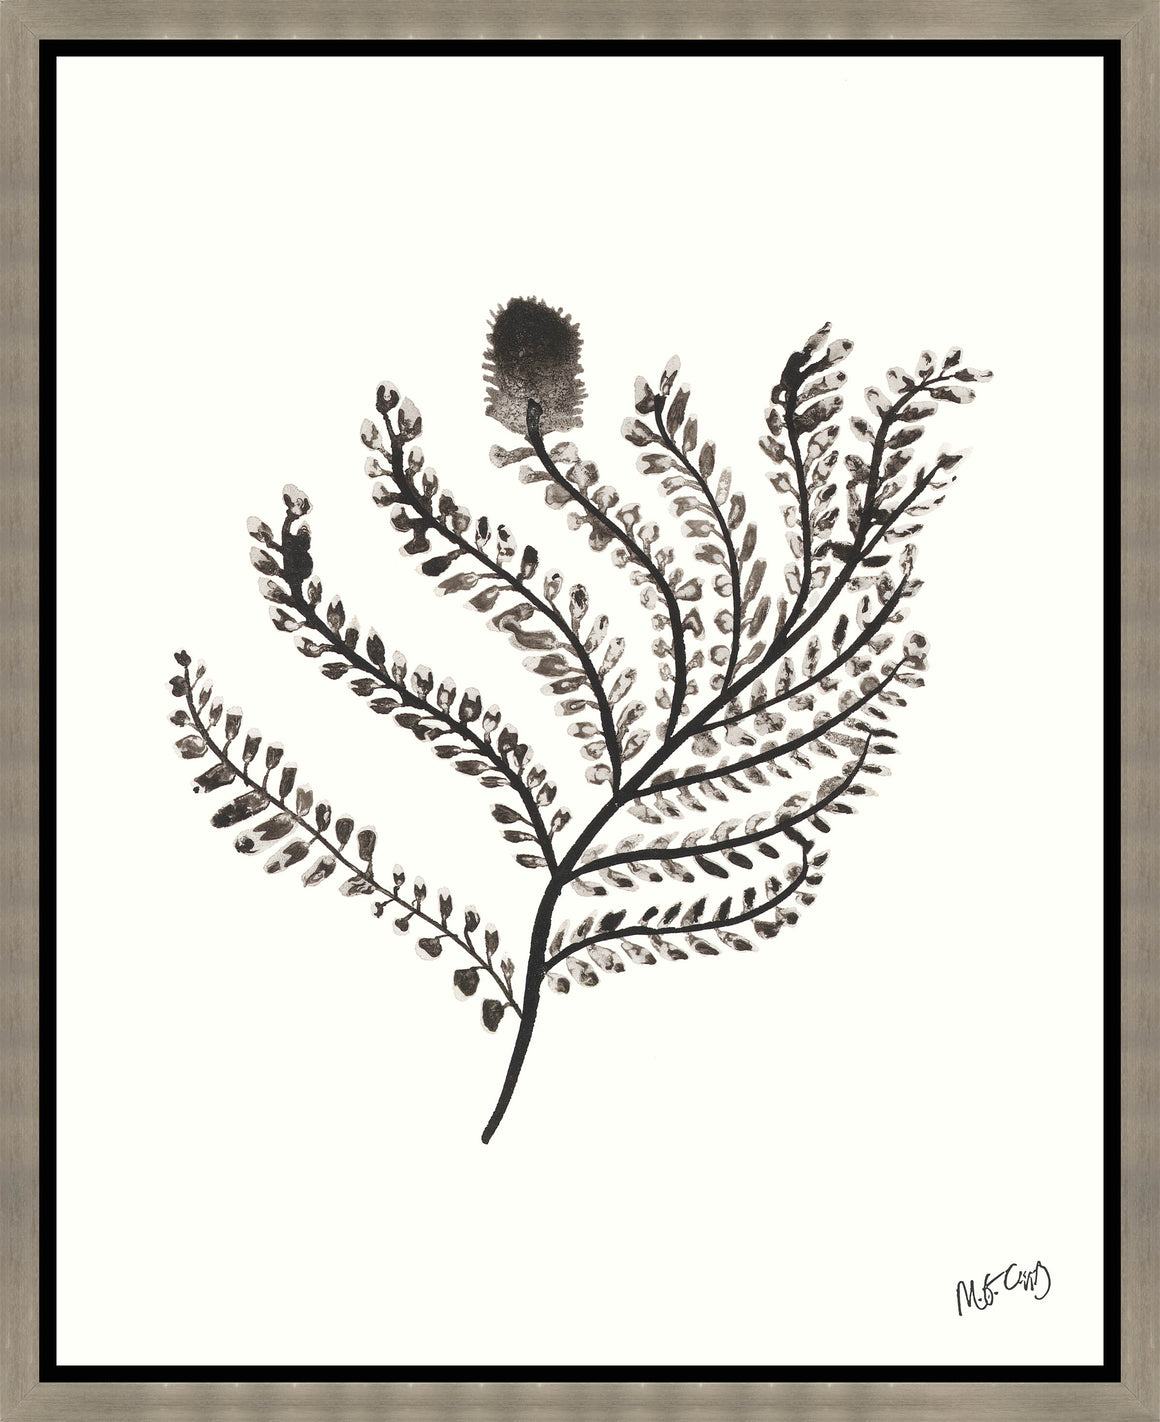 Plant Life XVII by M.G. Capps - 16" x 20" Framed